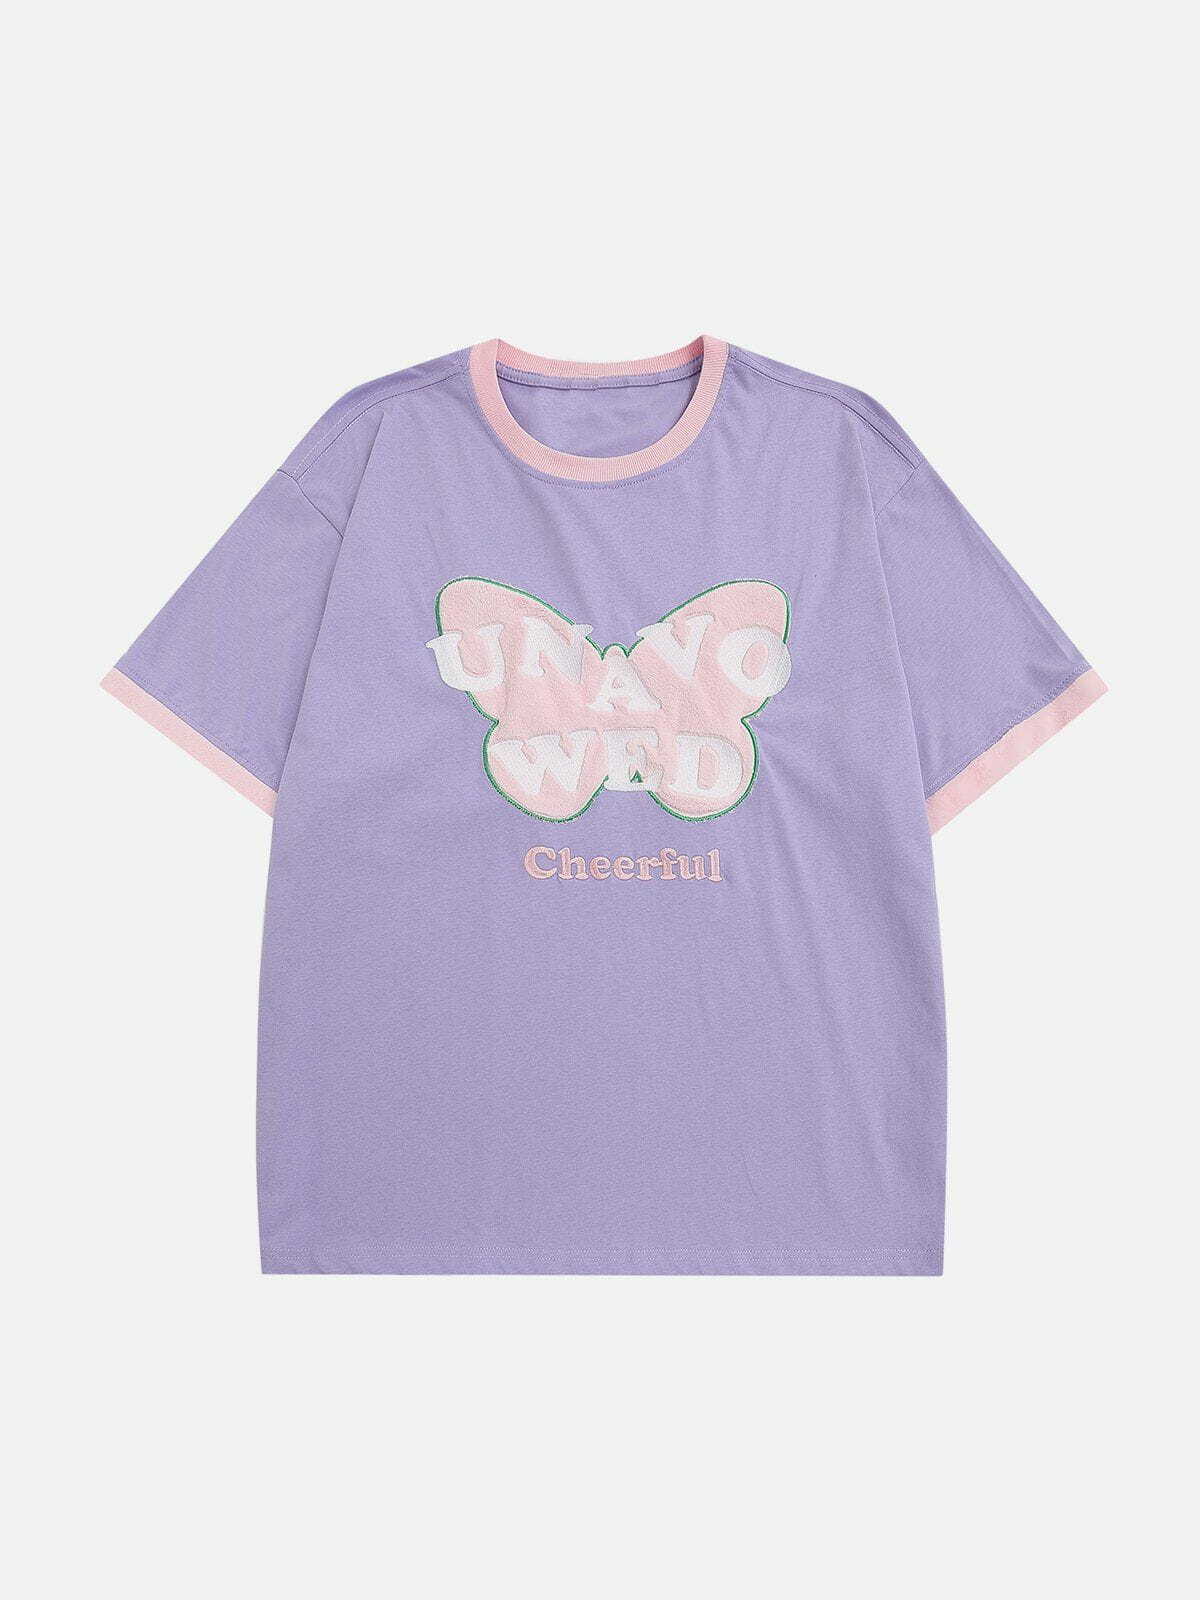 youthful butterfly embroidered tee edgy  retro streetwear essential 7042